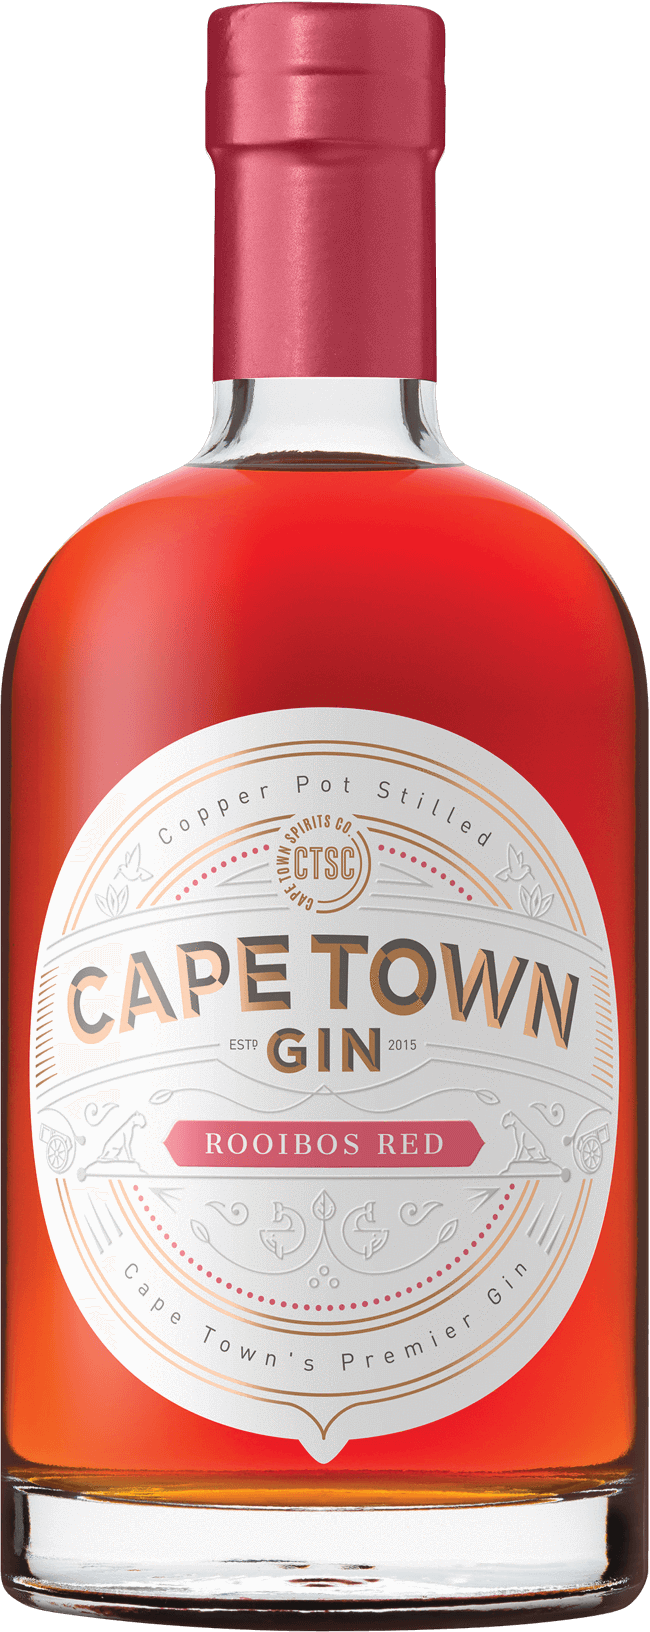 Cape Town Rooibos Red Gin Bottle